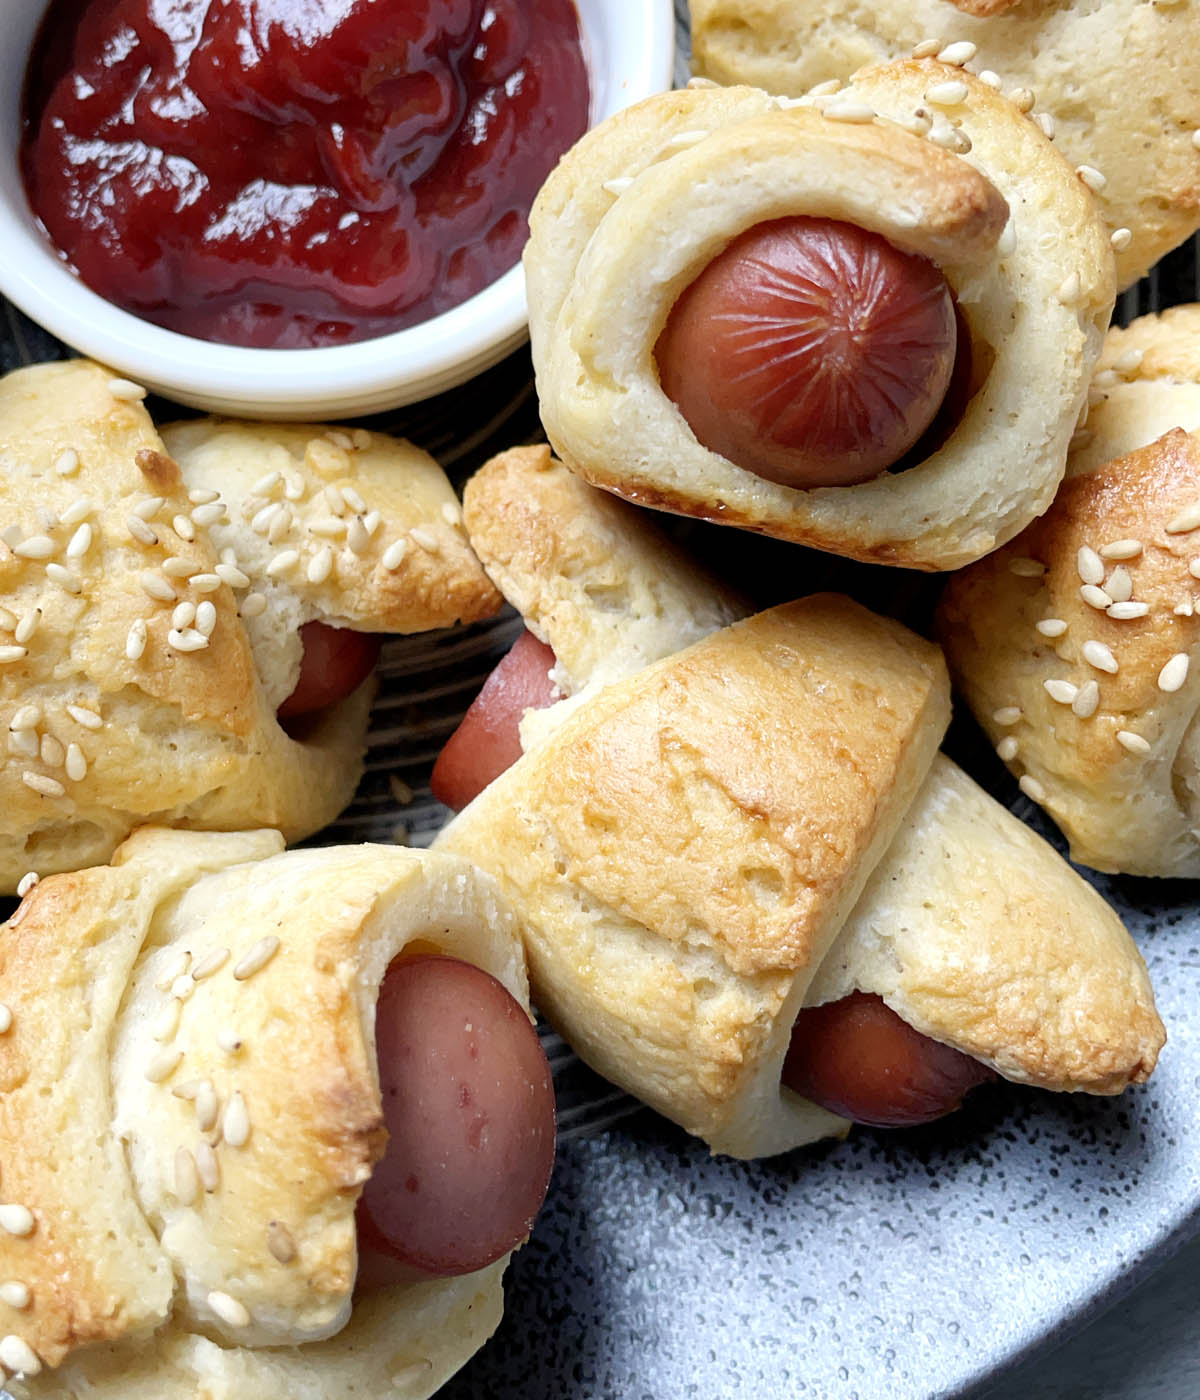 A small white bowl of red ketchup, surrounded by bread wrapped wieners on a plate.